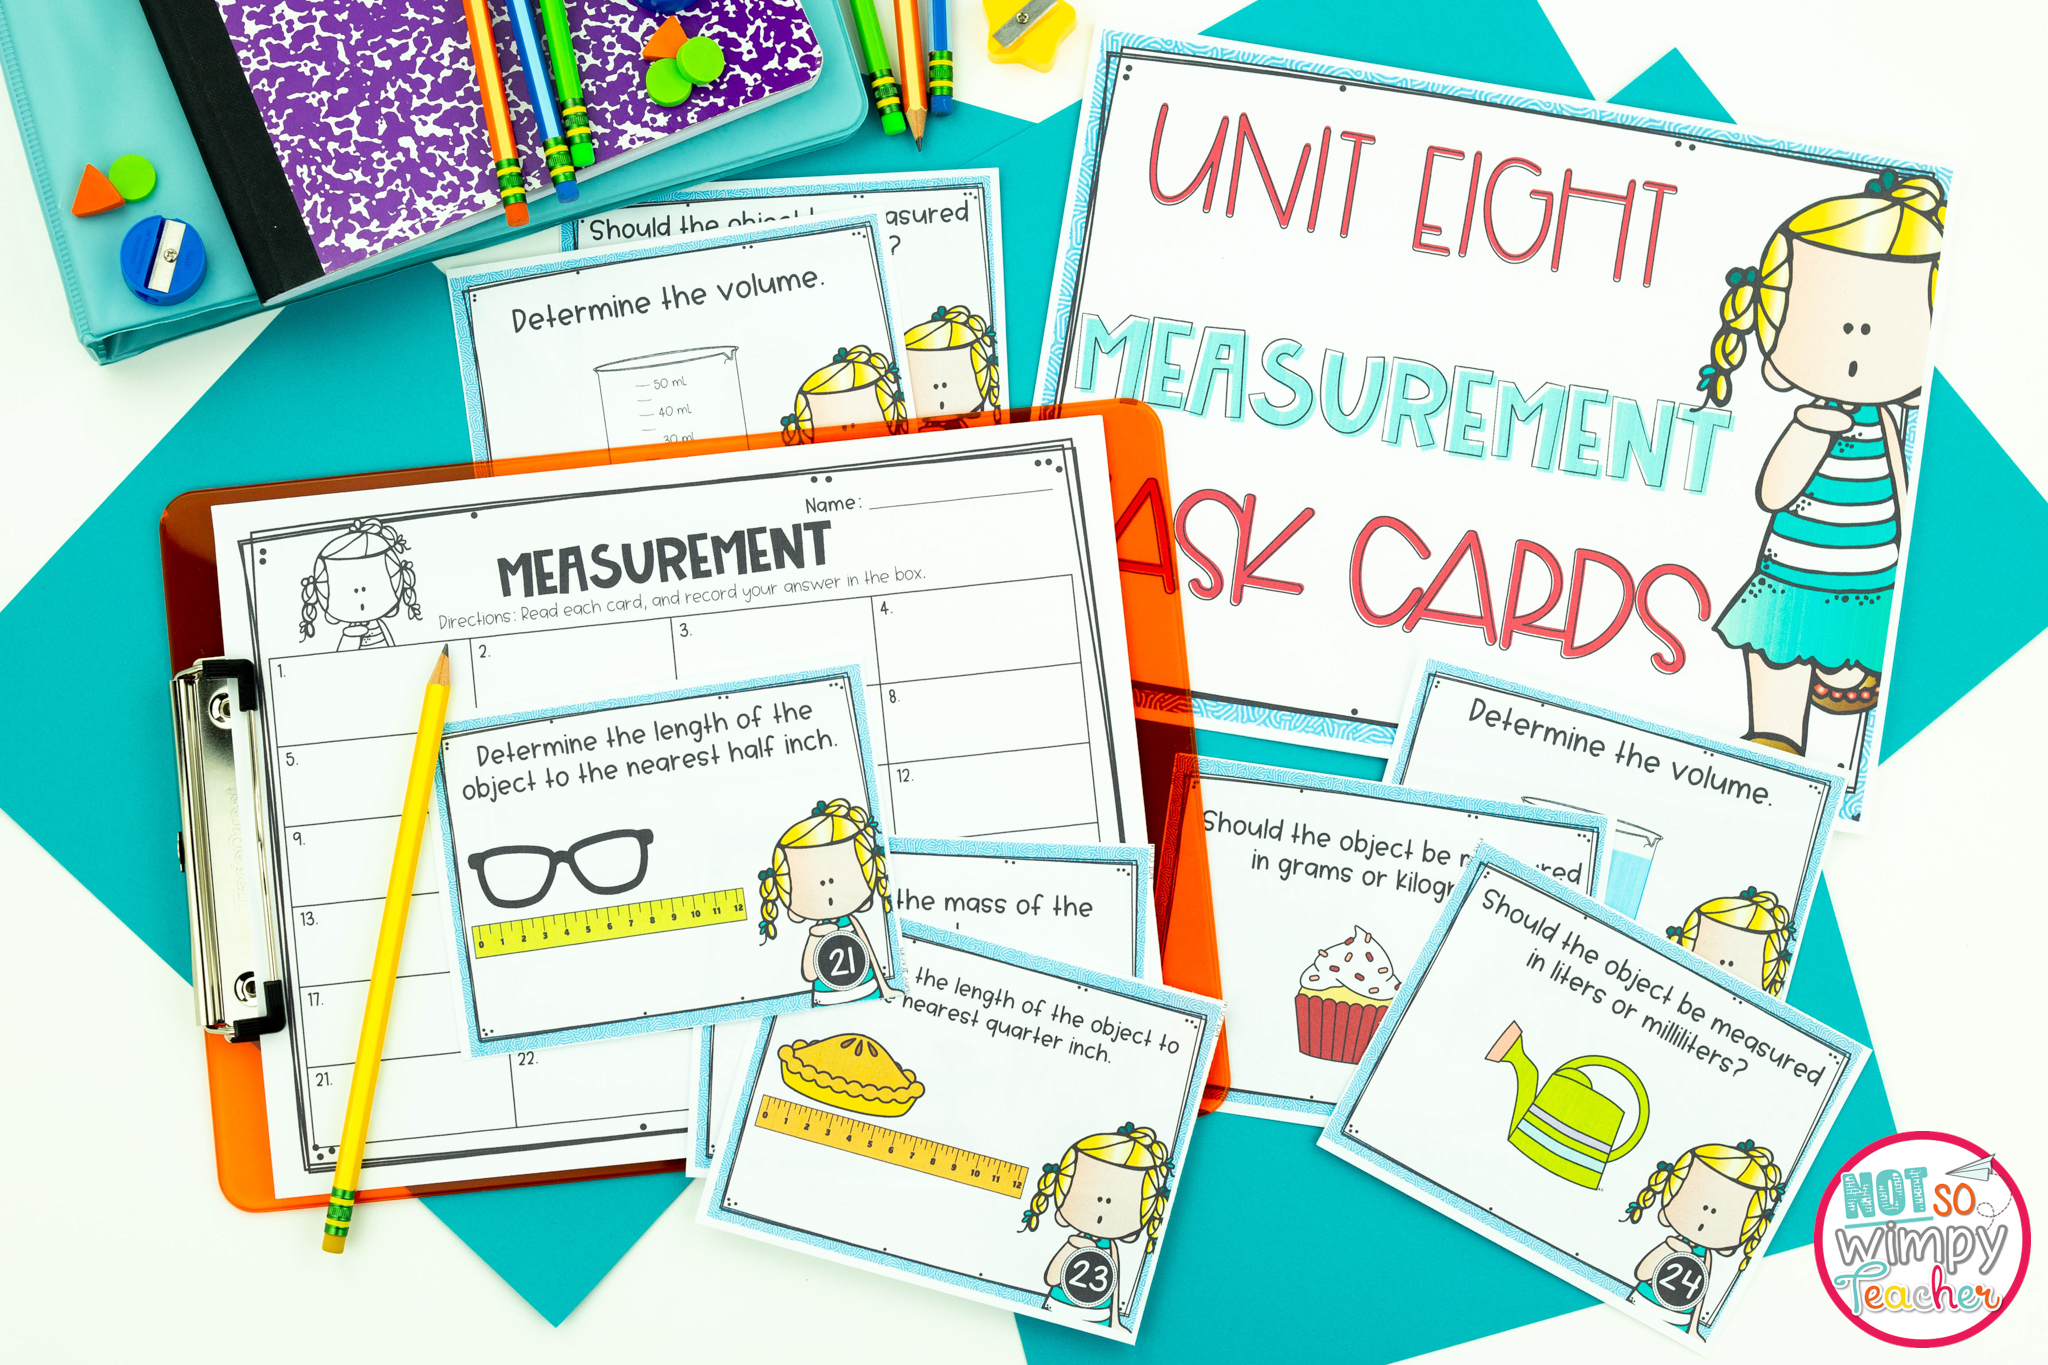 Image shows task cards and tracking sheet used during math centers.